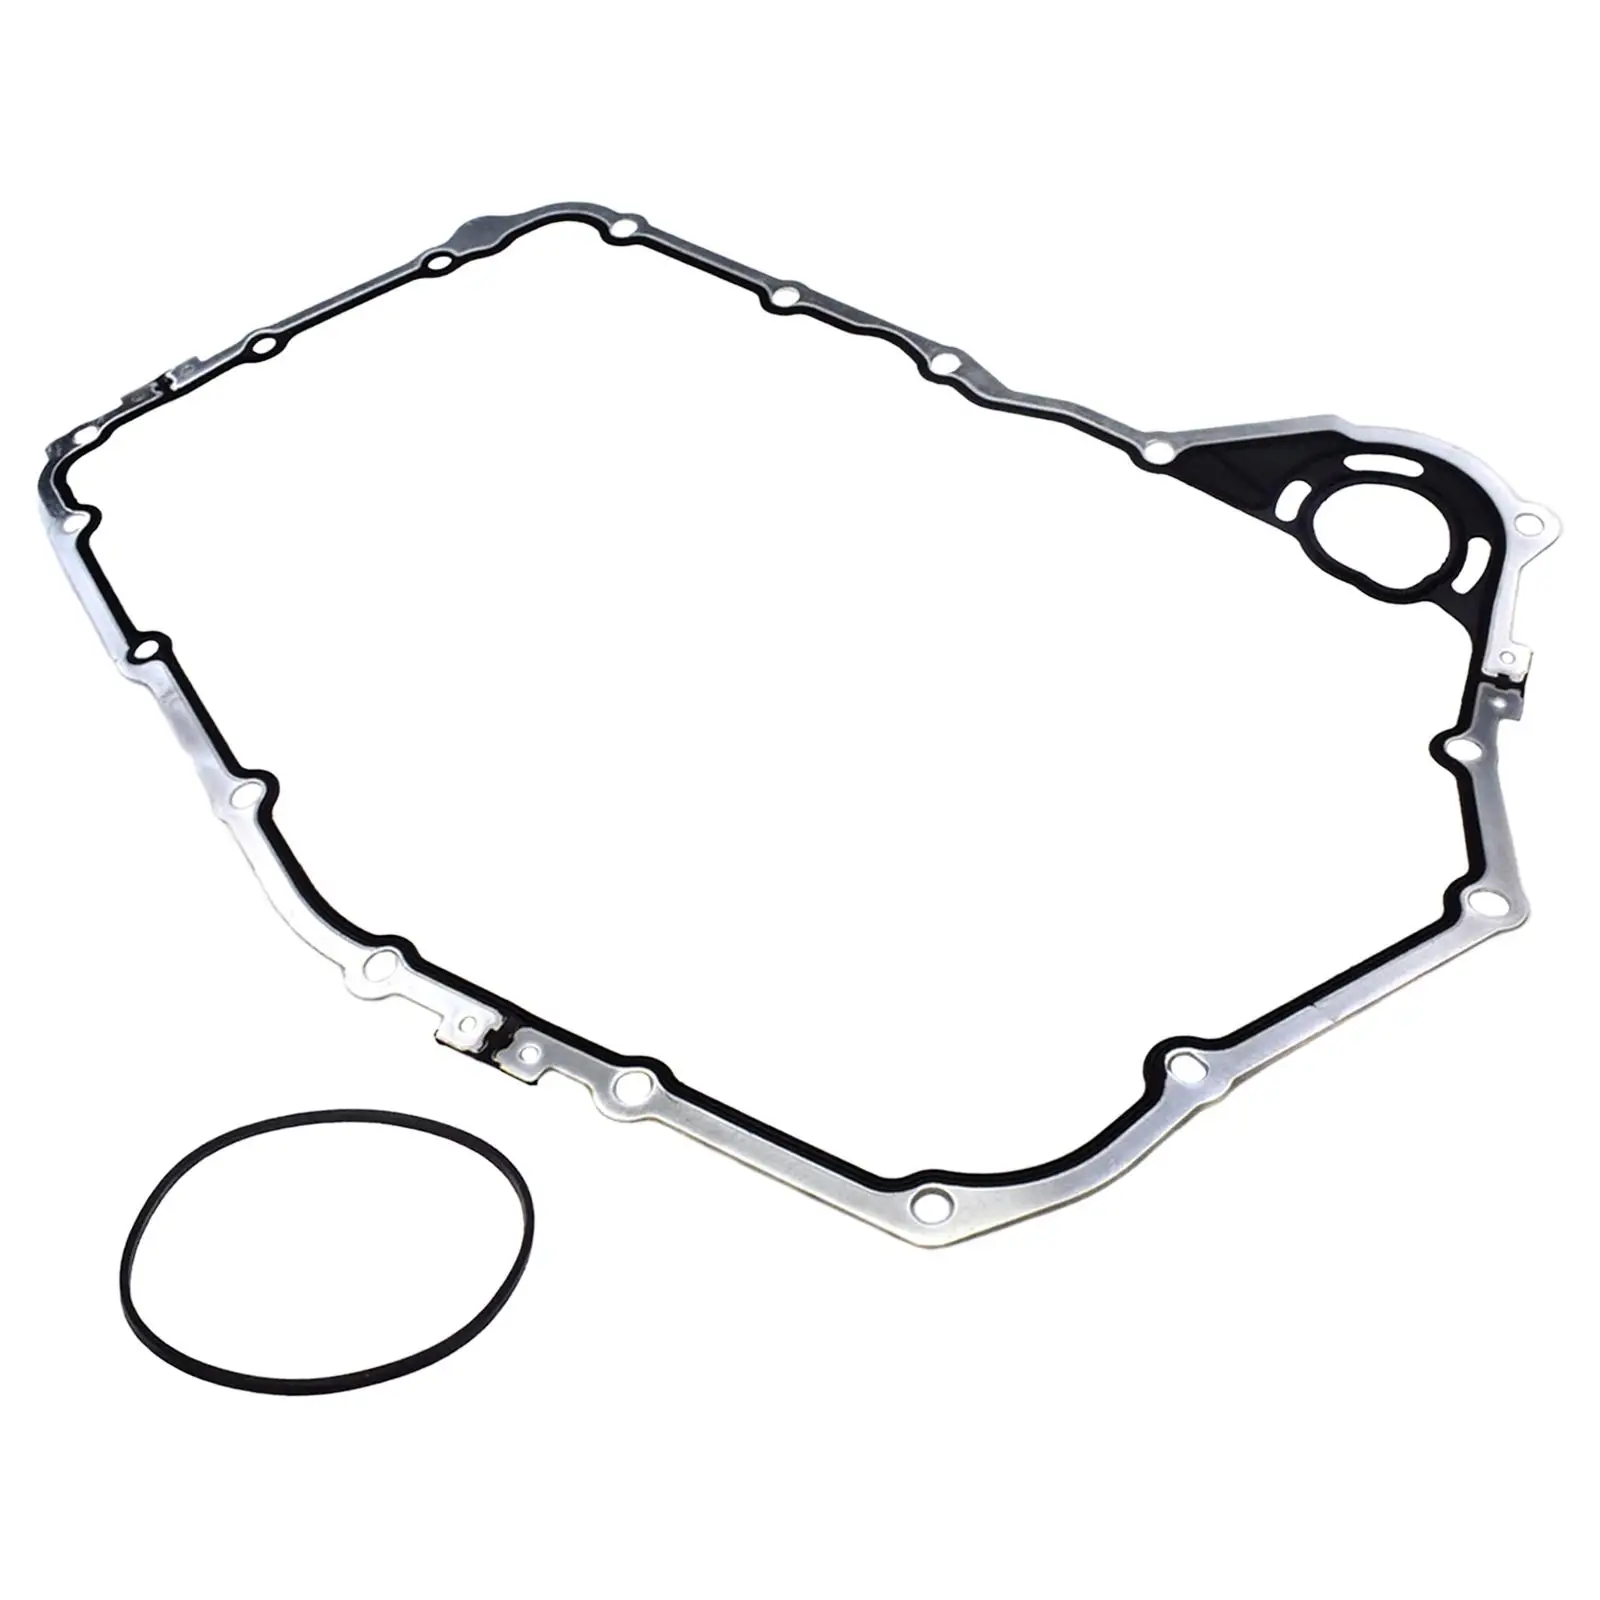 Automatic Transmission Case Gasket 24206959.5/S80 Replace